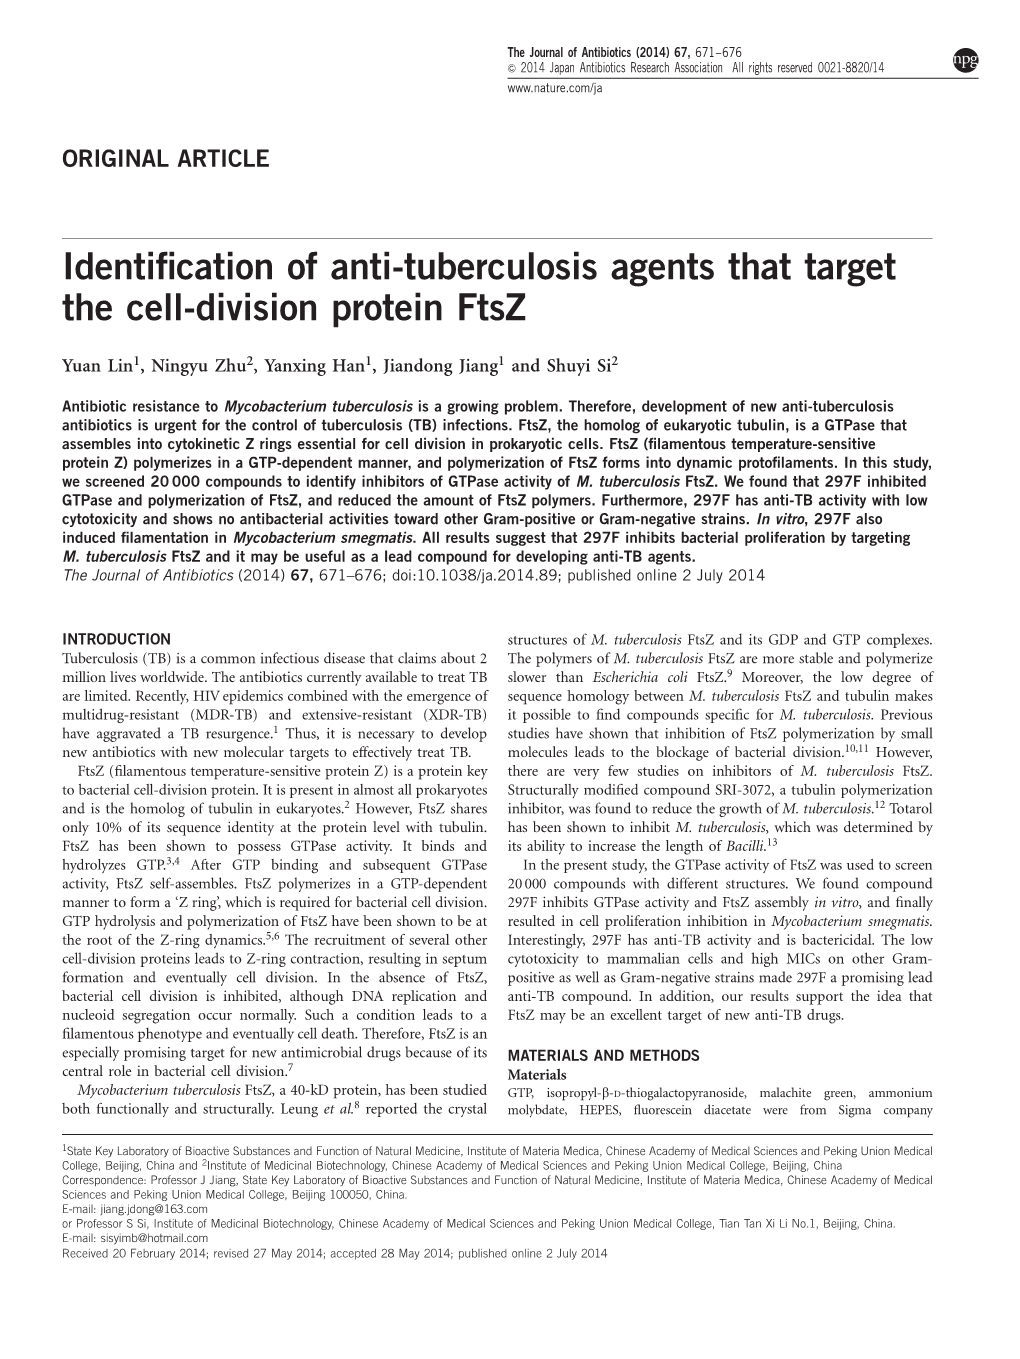 Identification of Anti-Tuberculosis Agents That Target the Cell-Division Protein Ftsz